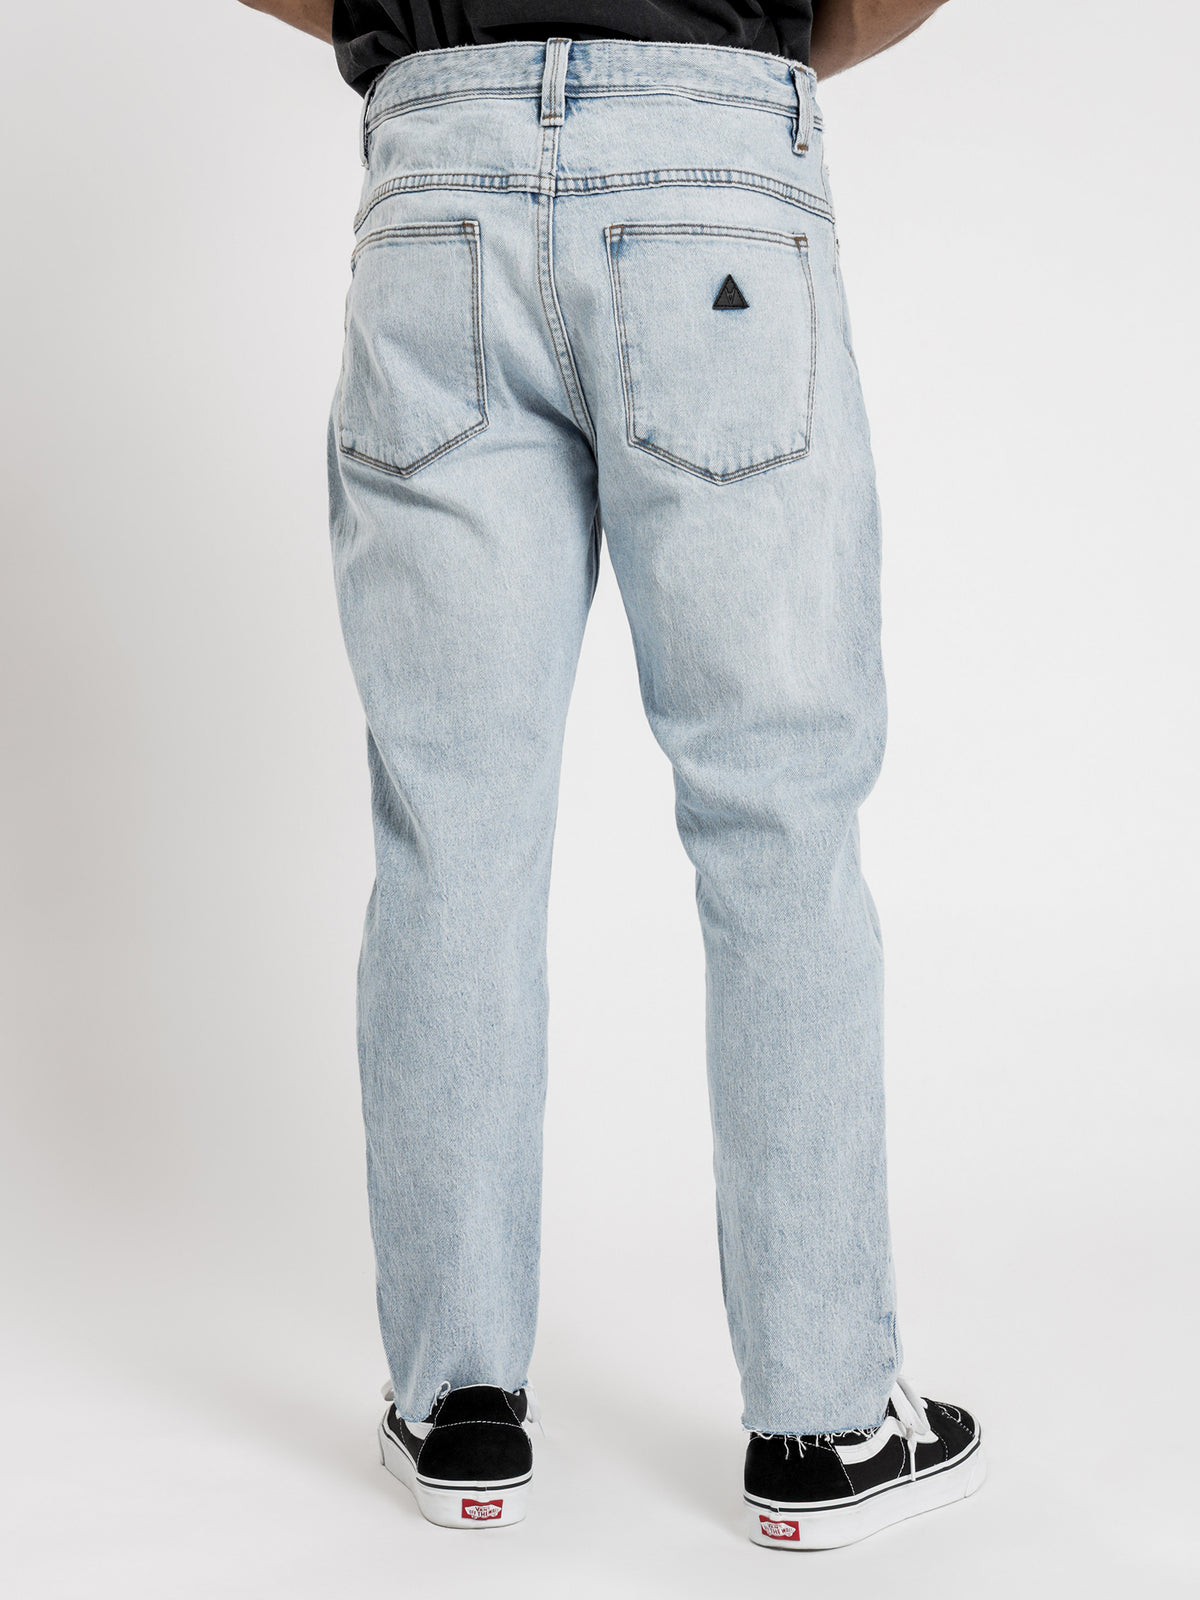 Chopped Straight-Leg Jeans in Sessions Blue Denim